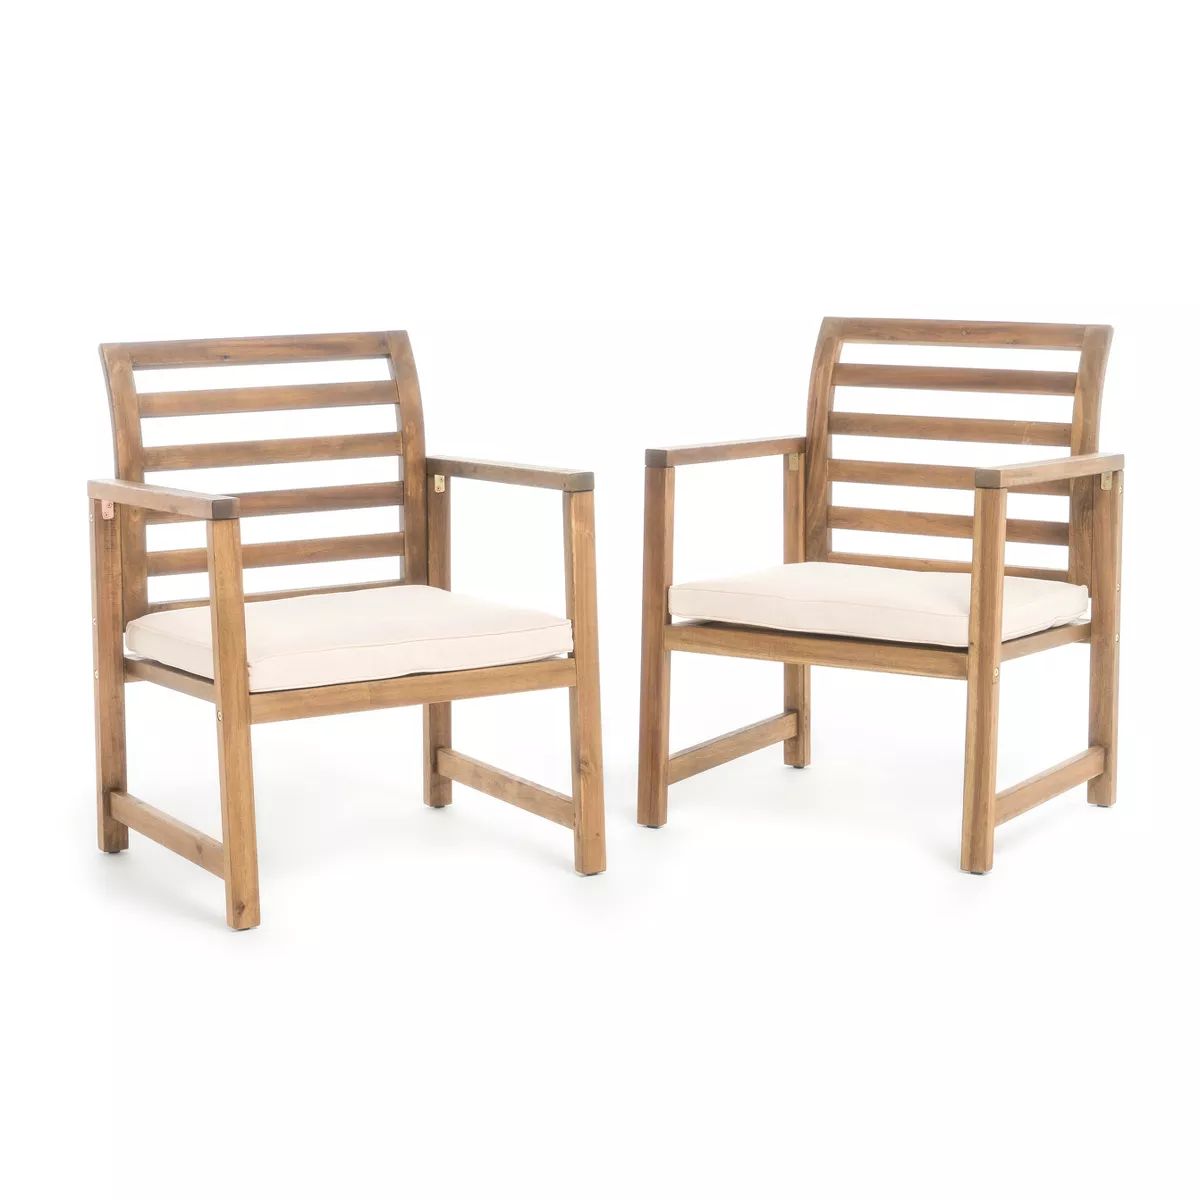 Emilano Set of 2 Acacia Wood Club Chair - Natural Stained - Christopher Knight Home | Target